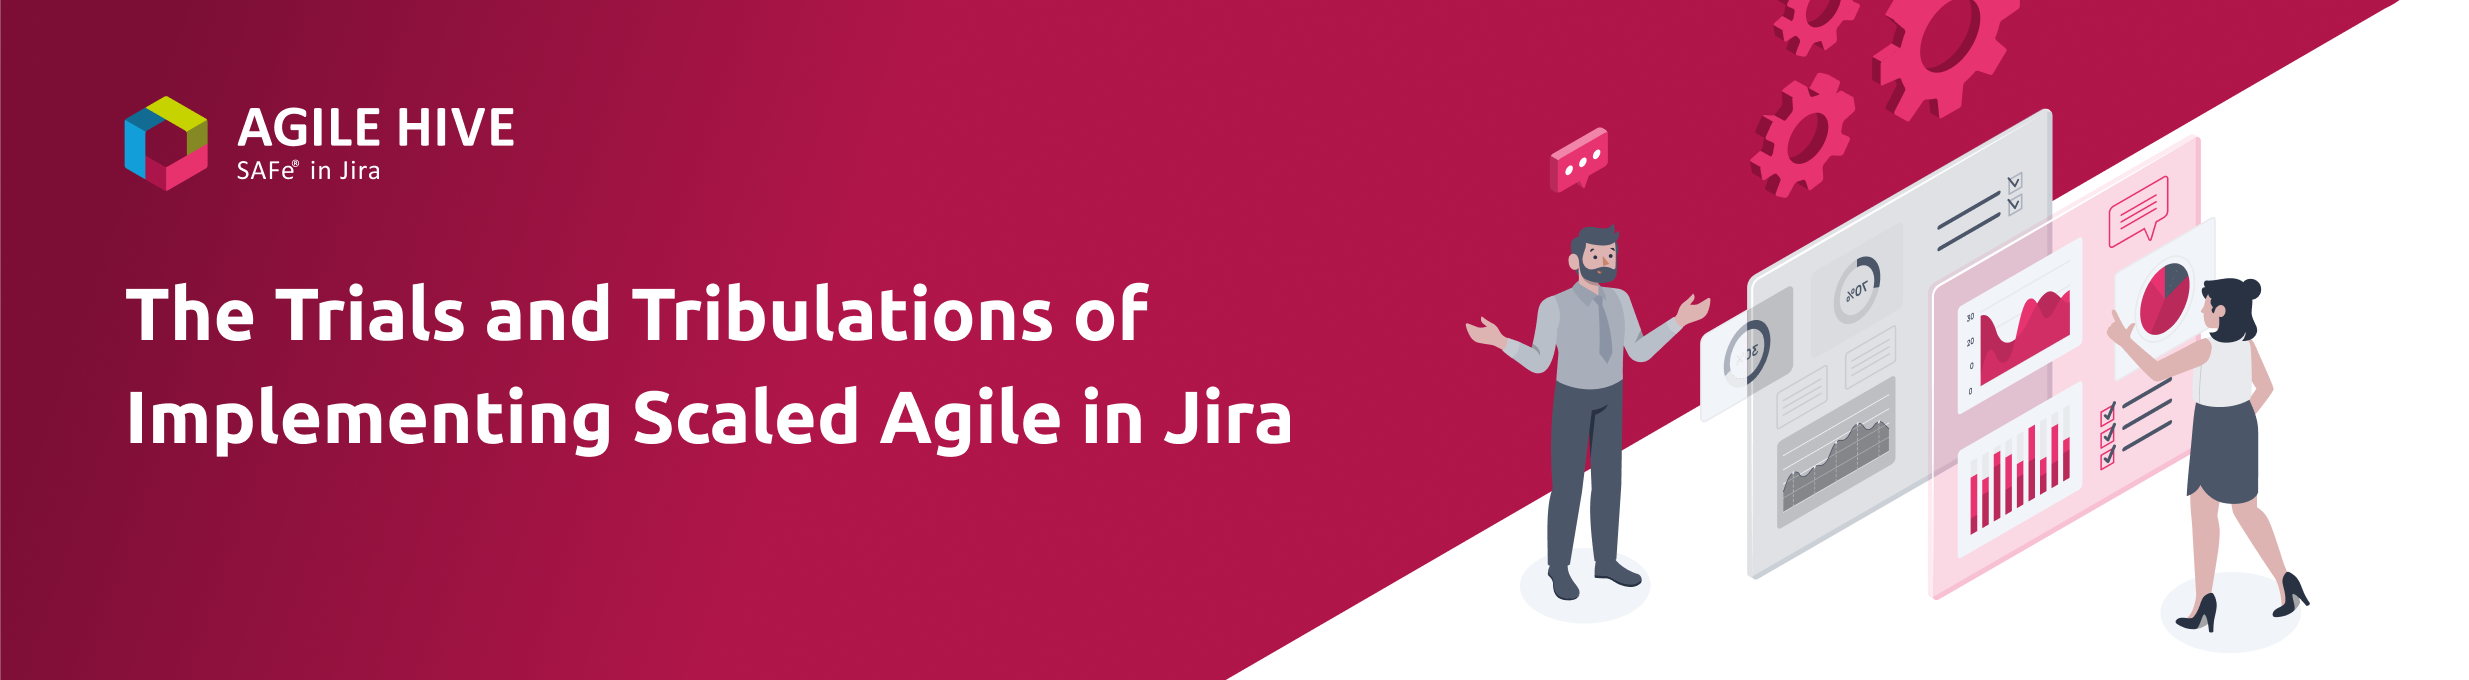 The Trials and Tribulations of Implementing Scaled Agile in Jira - banner